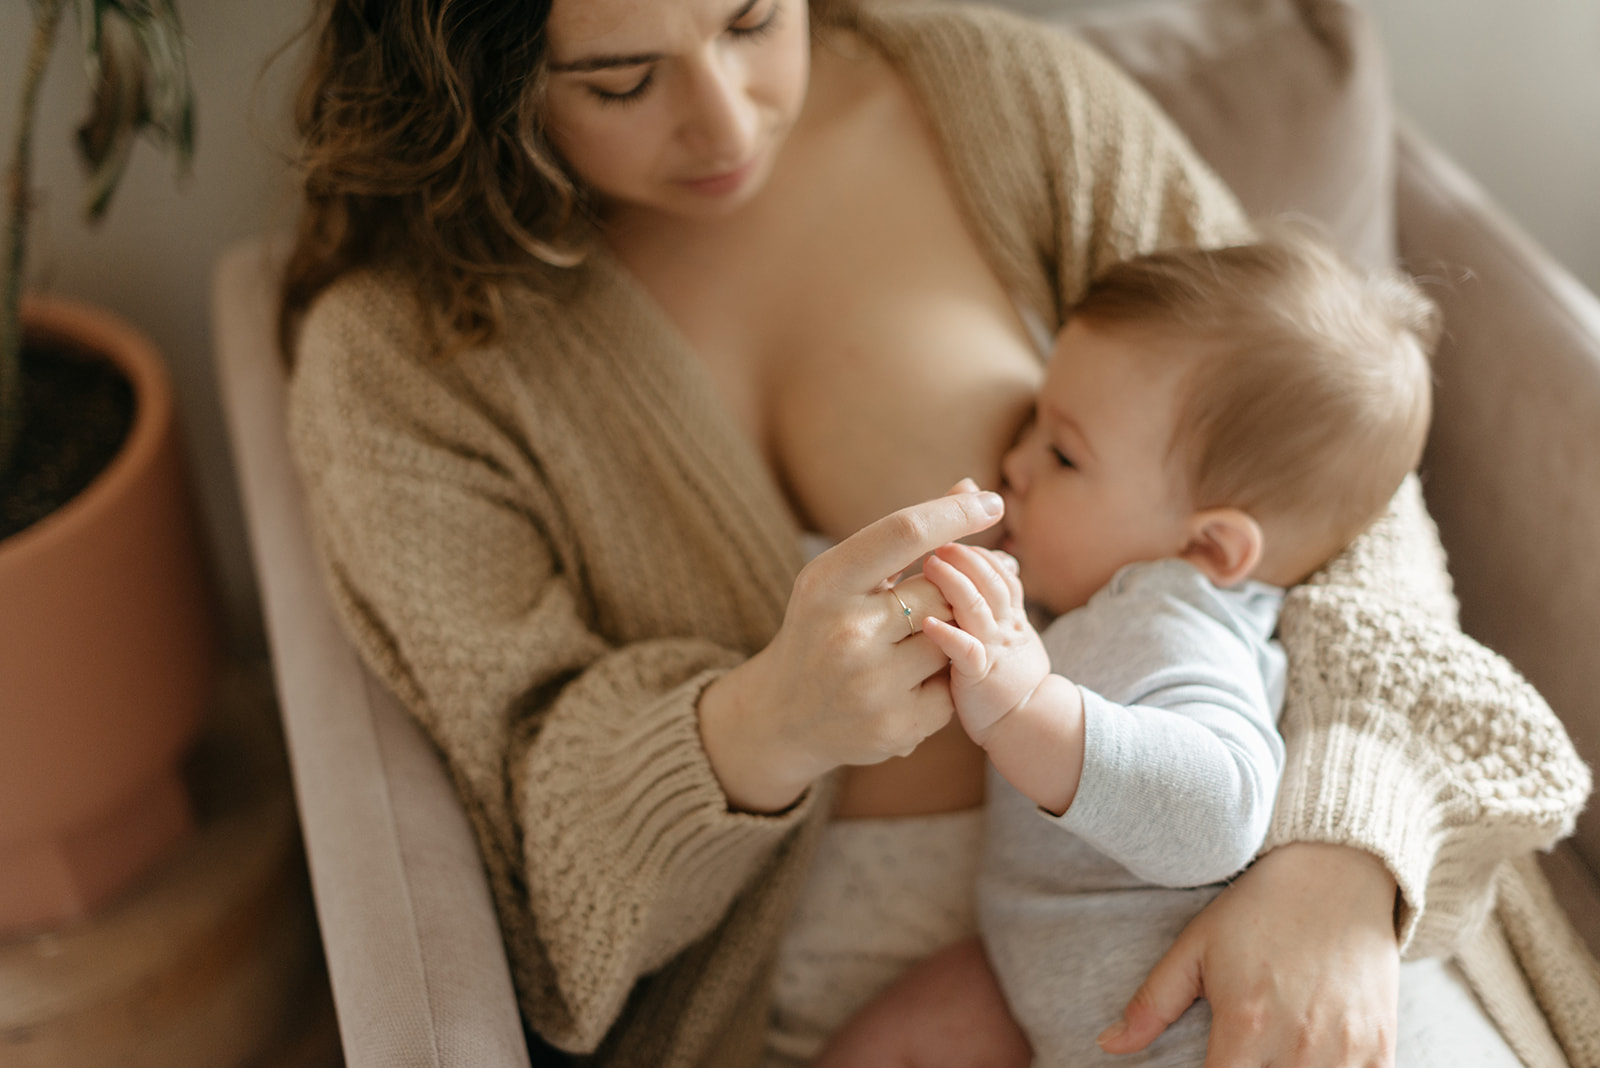 A mother and baby breastfeed on the couch in their home.